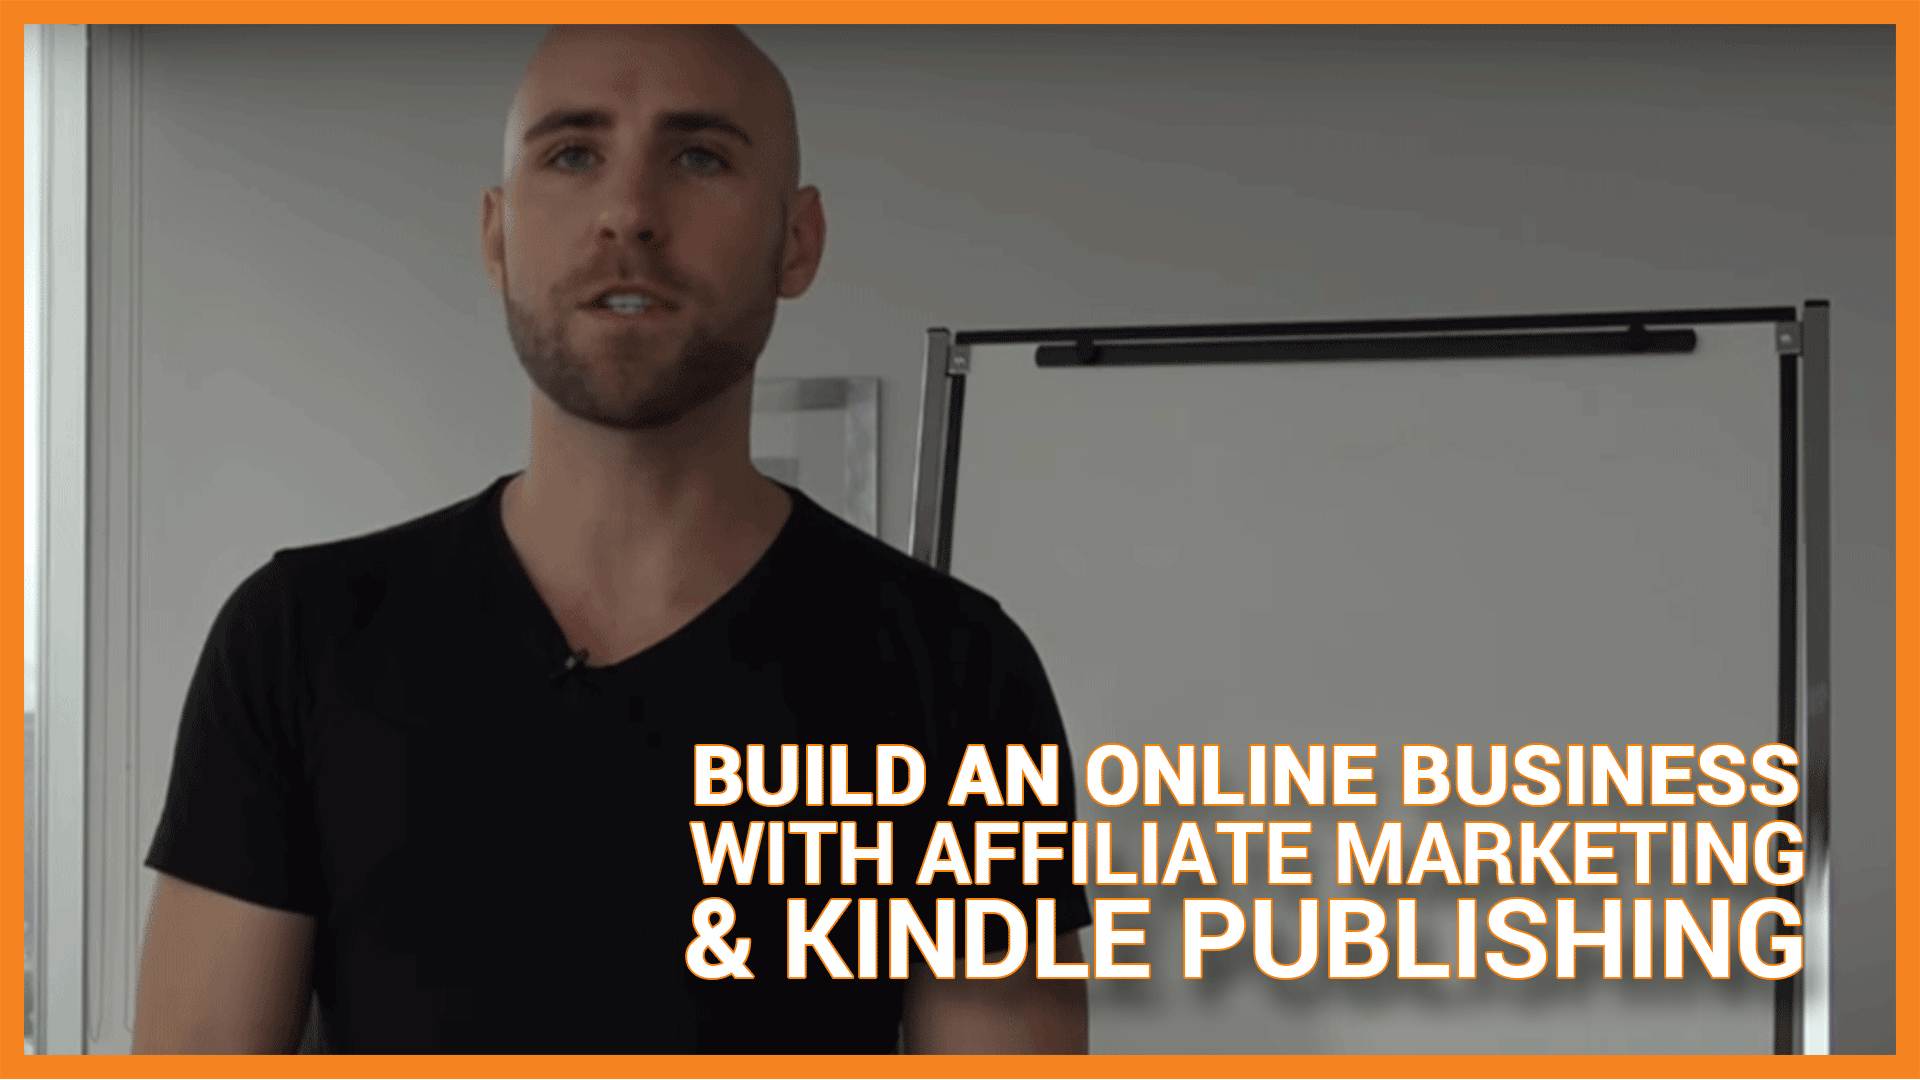 How To Build An Online Business With Affiliate Marketing & Kindle Publishing Together